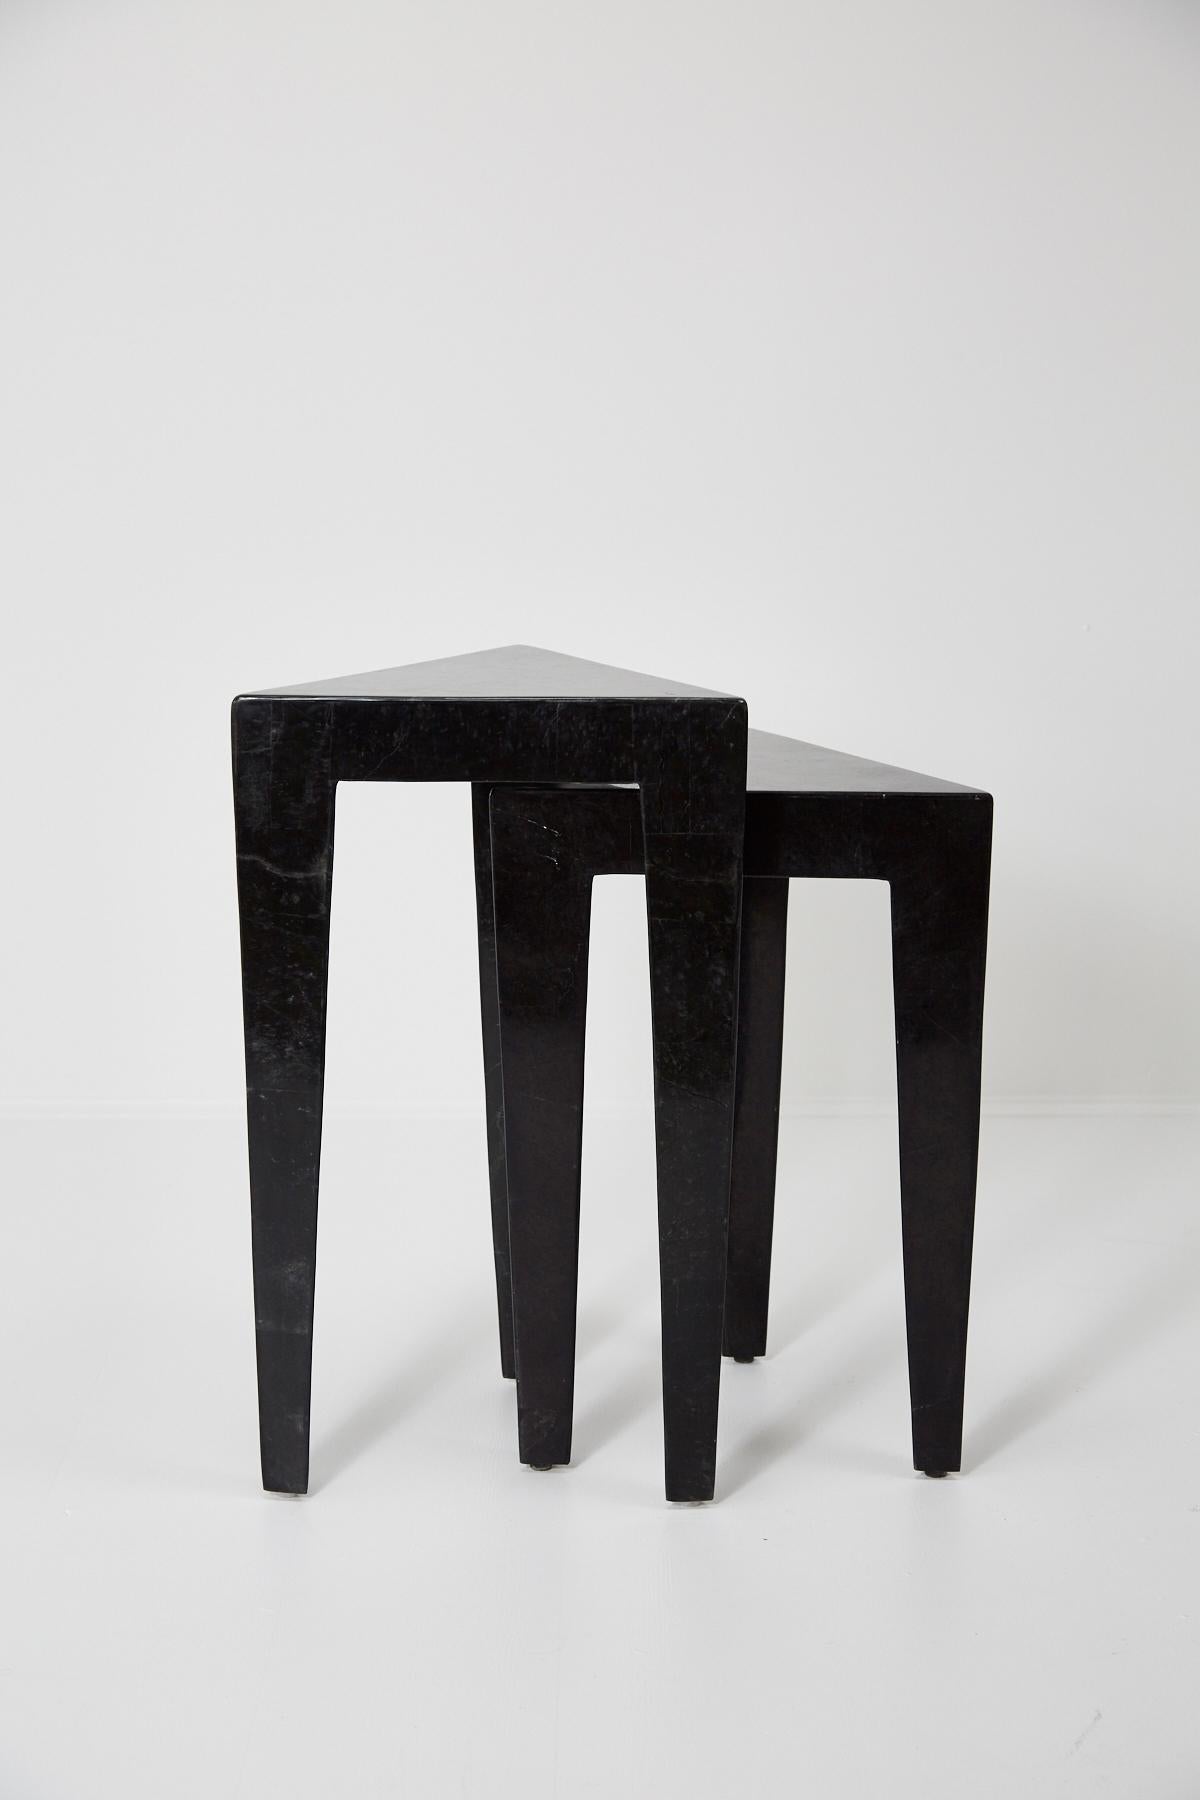 Black Tessellated Stone Triangular Nesting Tables, 1990s For Sale 2